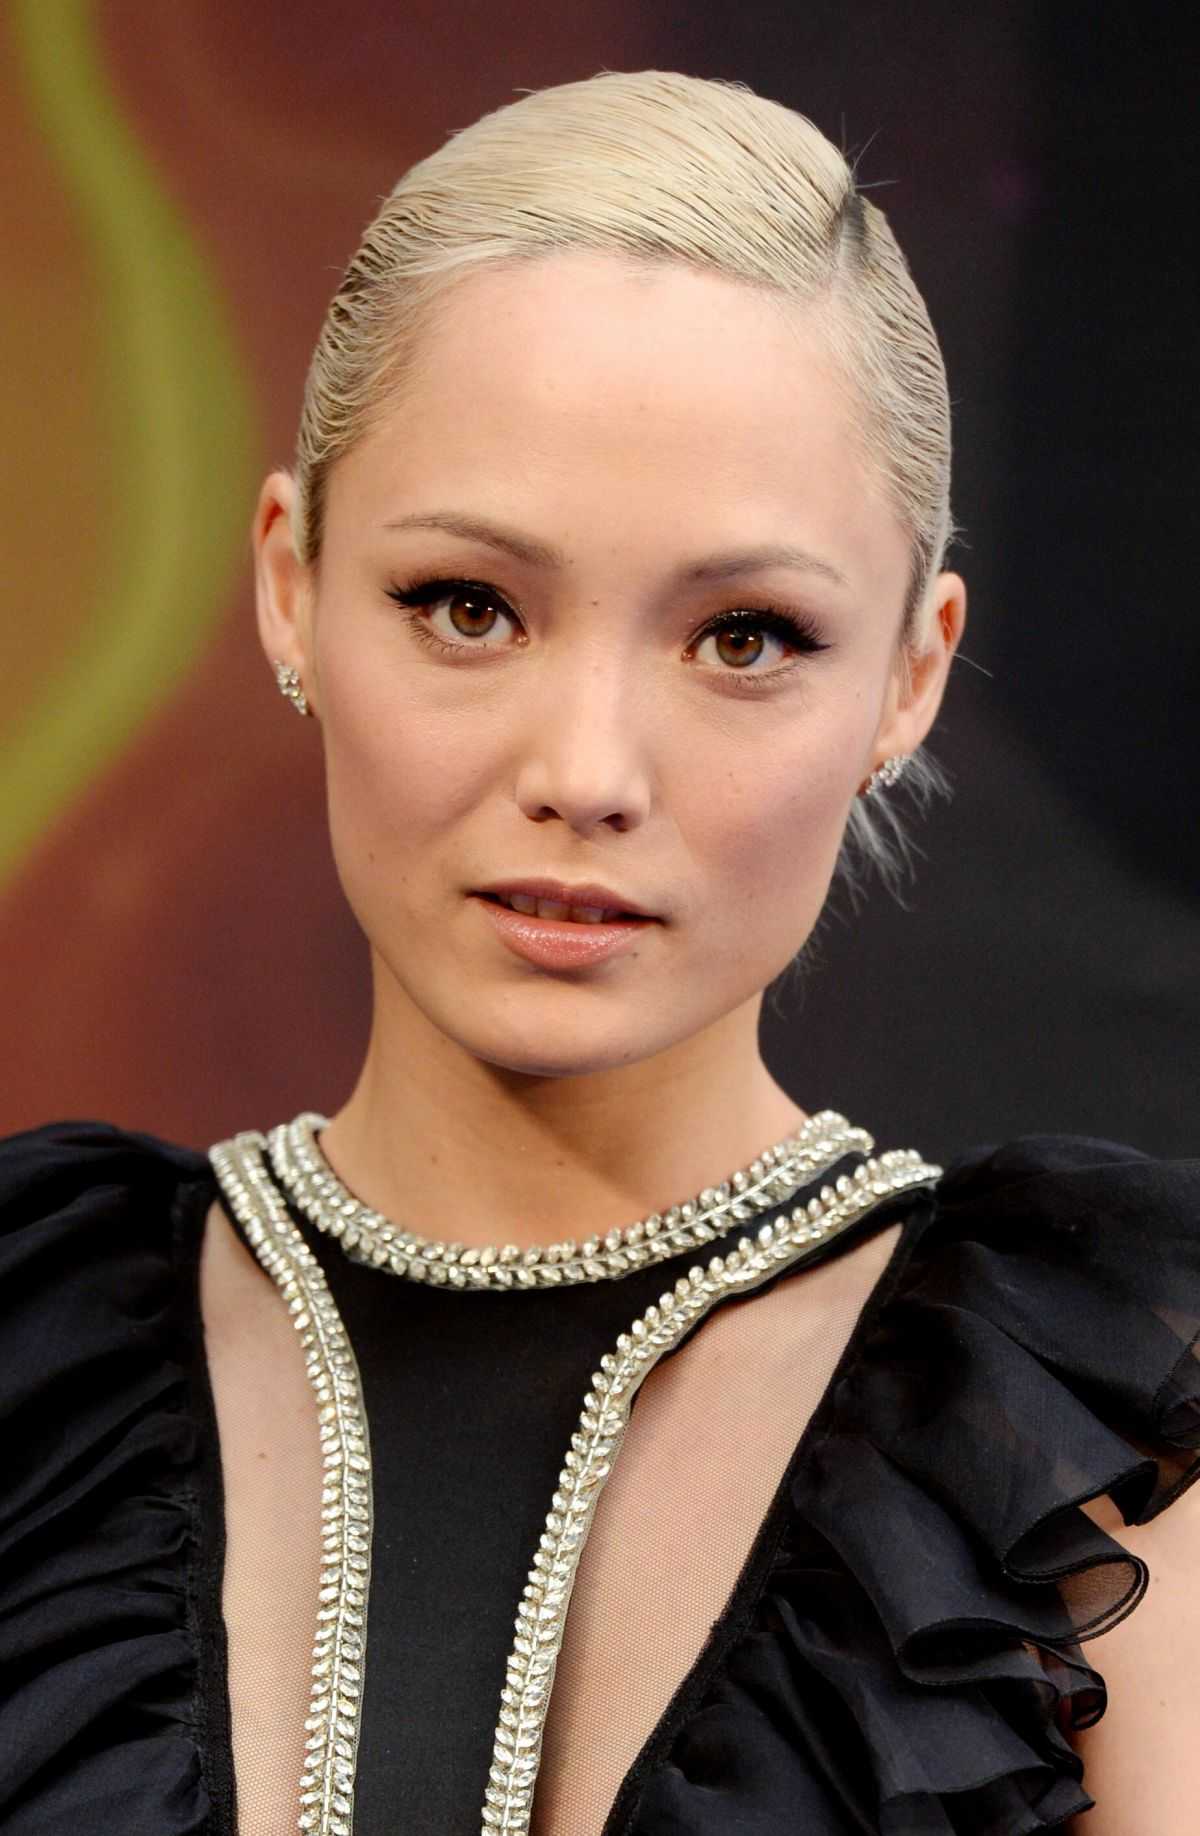 70+ Hot Pictures Of Pom Klementieff Who Plays Mantis In Marvel Cinematic Universe 129